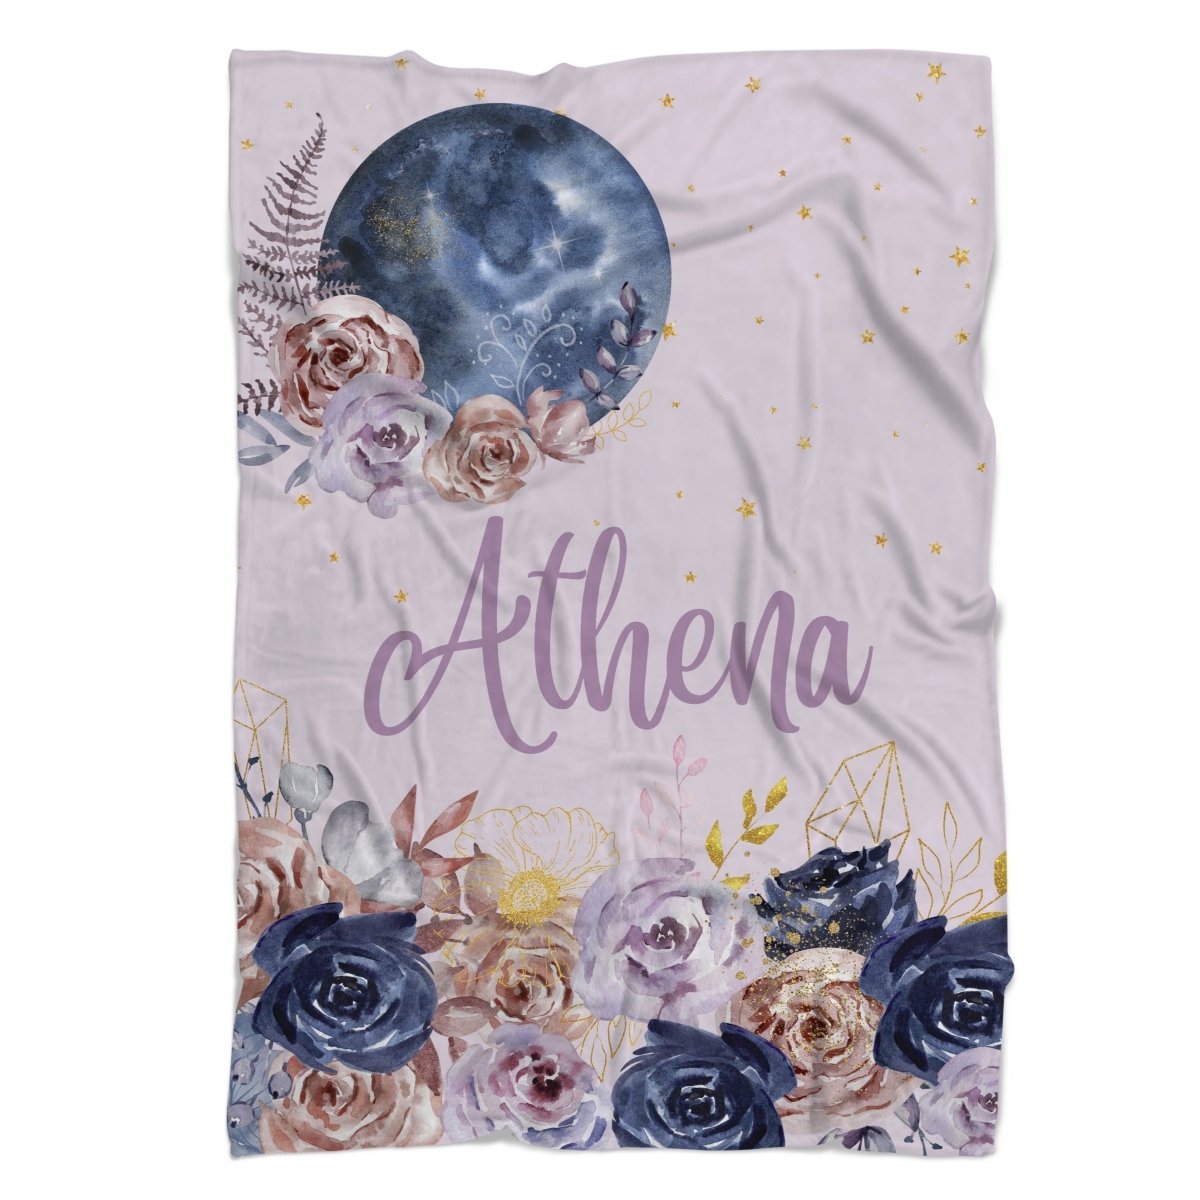 Floral Moon Personalized Minky Blanket - Floral Moon, gender_girl, Personalized_Yes